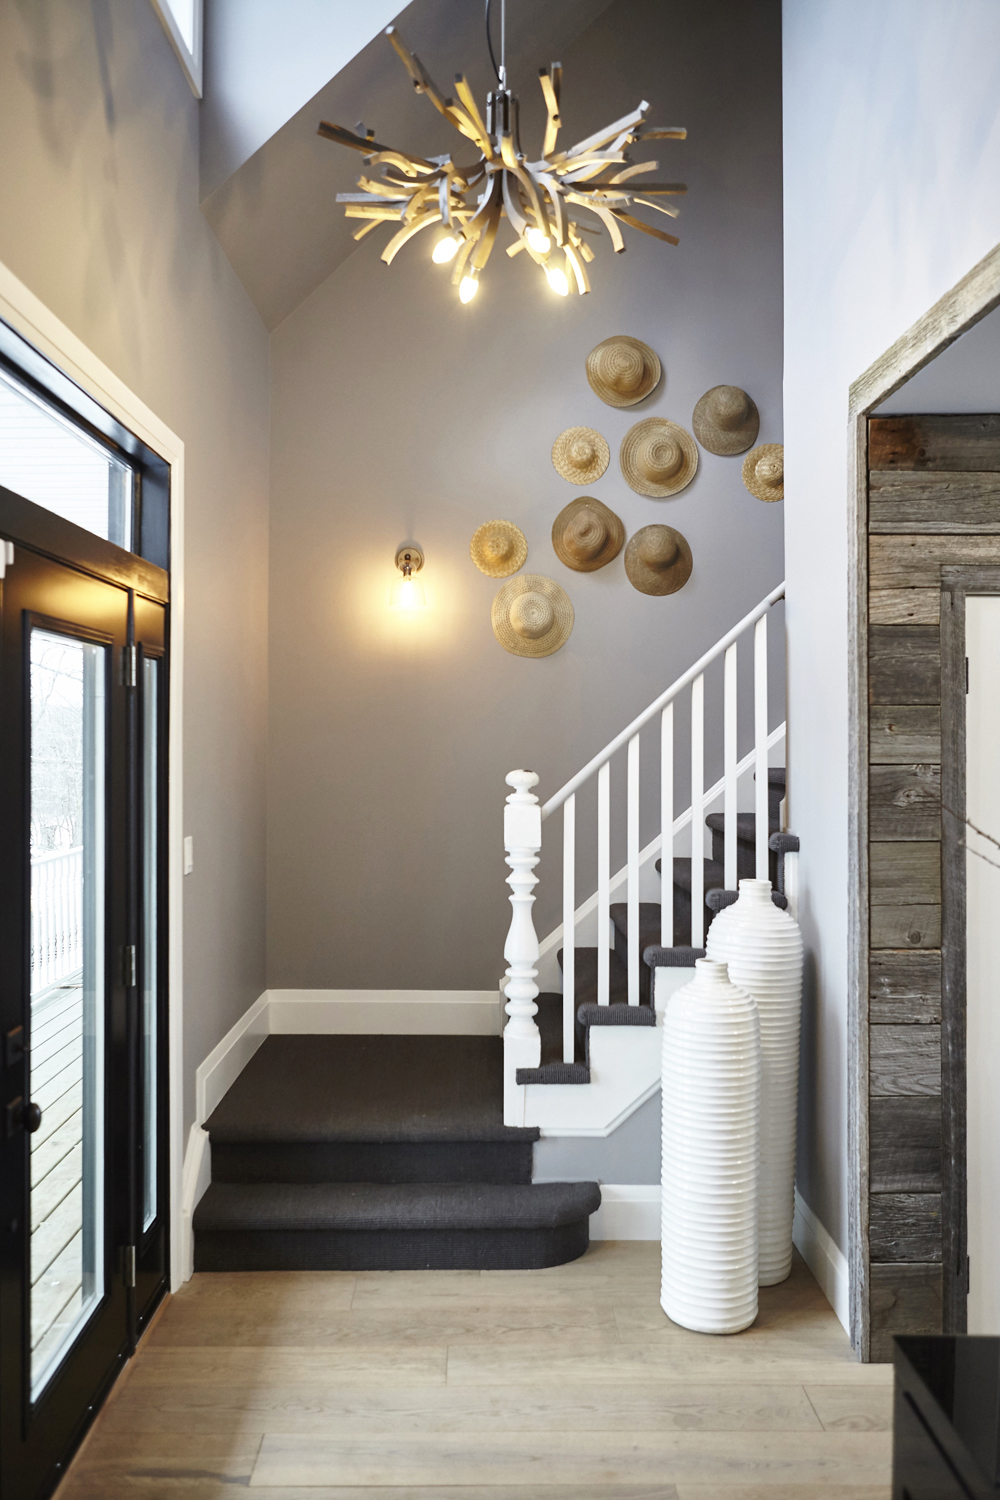 A pristine entryway with high ceilings, unique light fixtures and hat wall decor